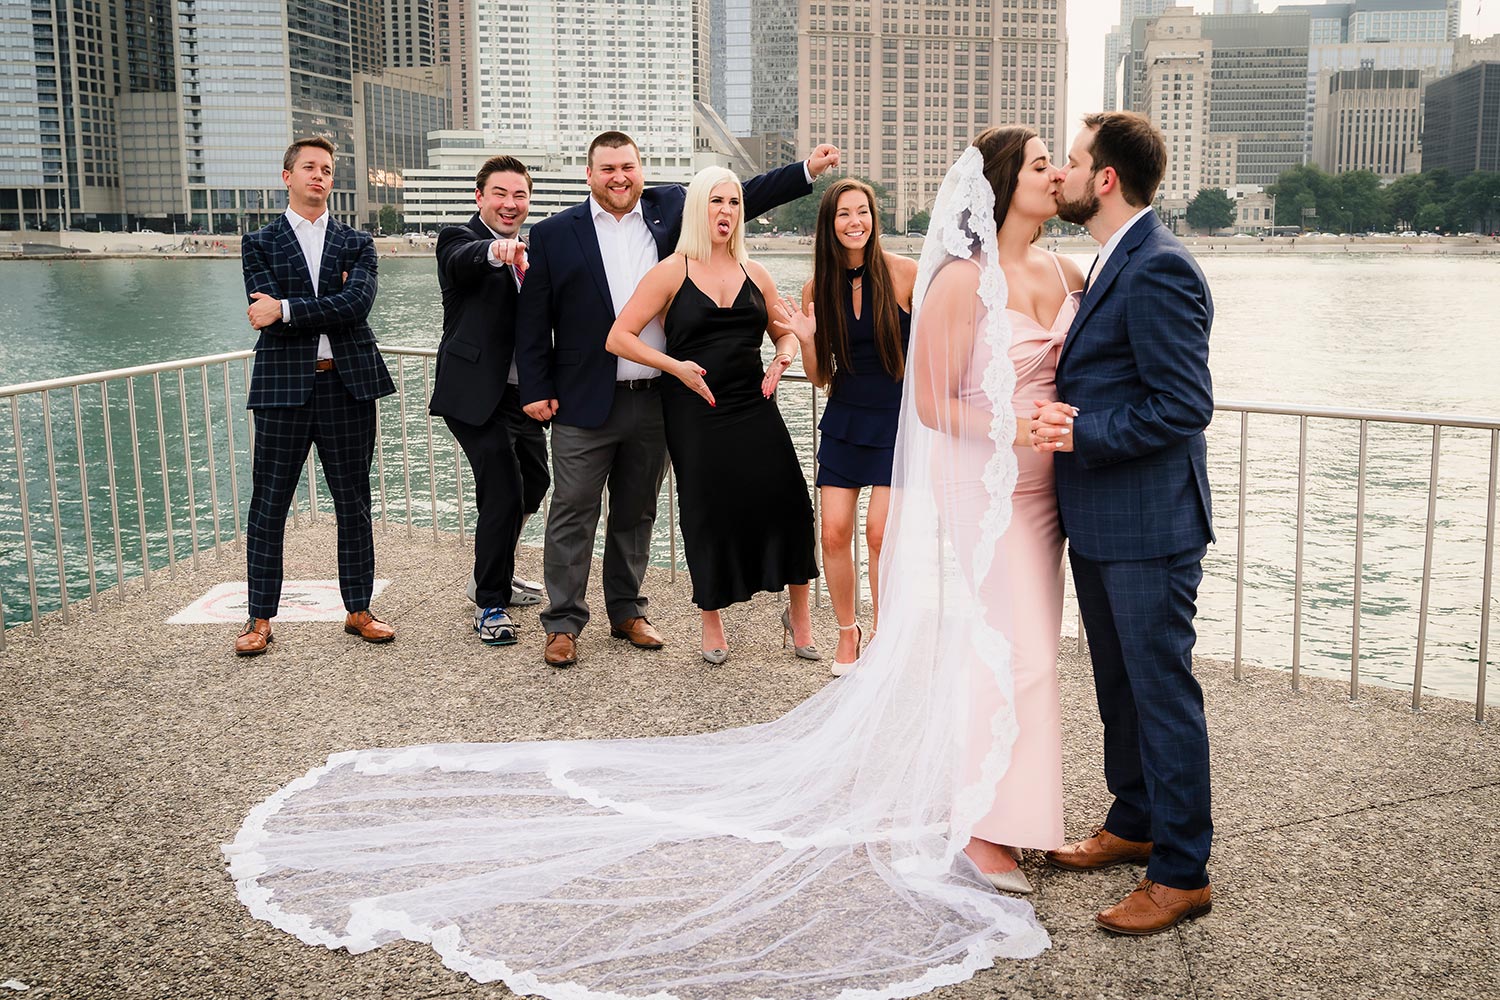 Bridal party cheering on the bride and groom at Milton Lee Olive Park in Chicago